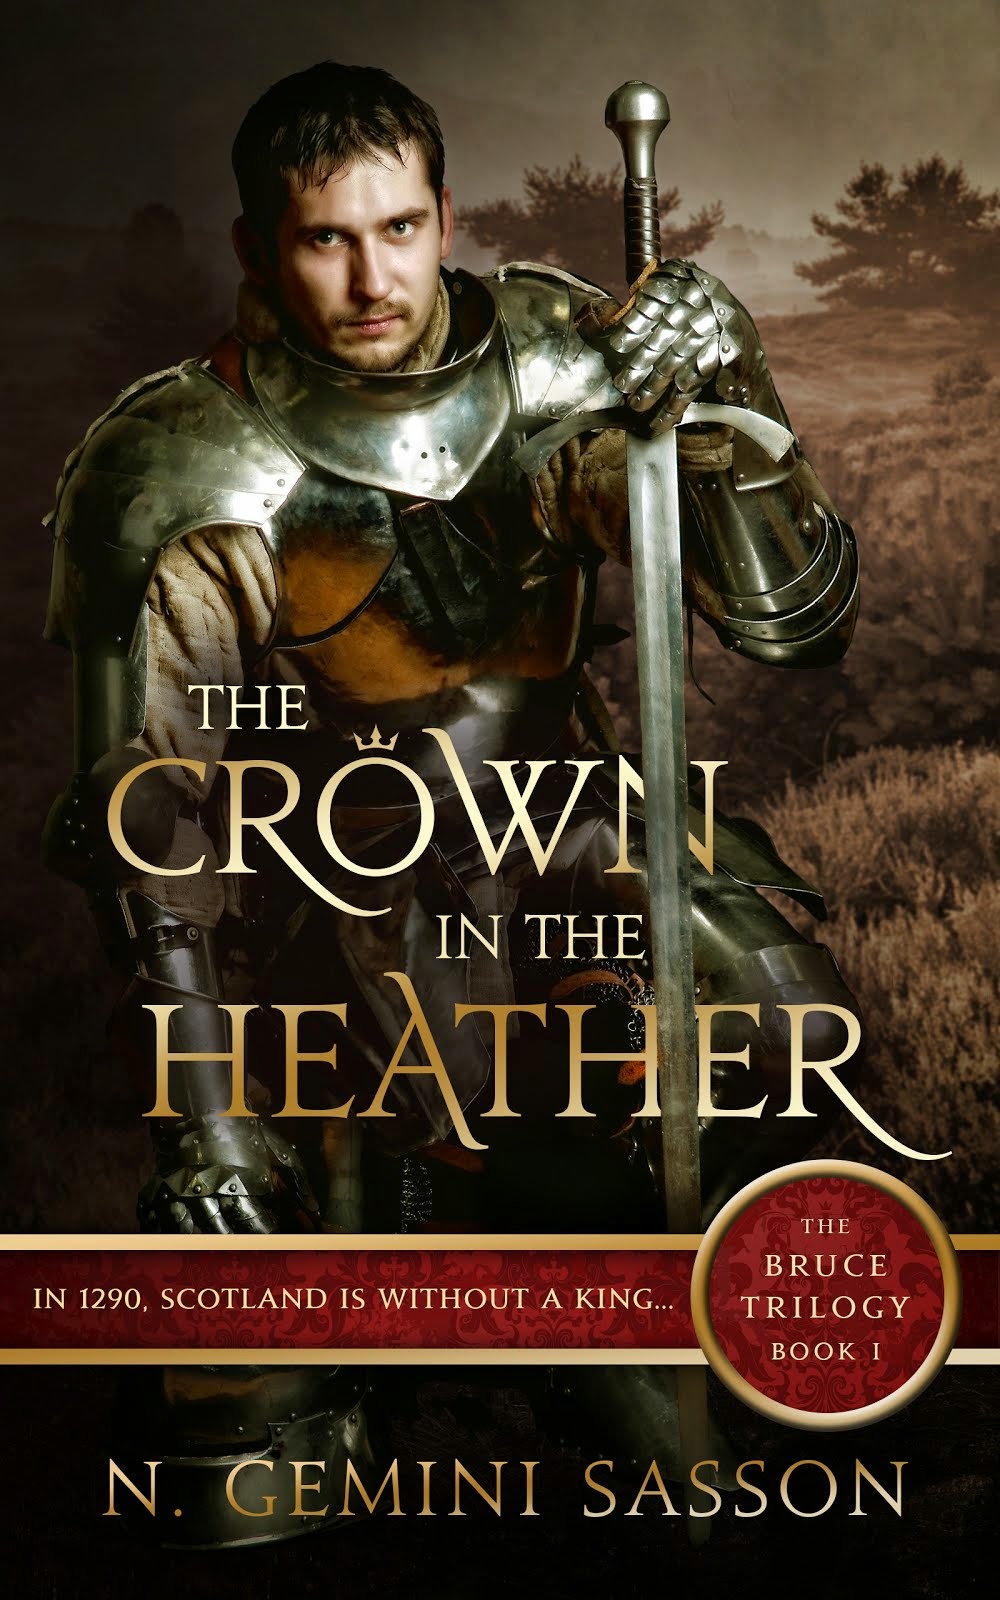 The Crown in the Heather (The Bruce Trilogy: Book I)